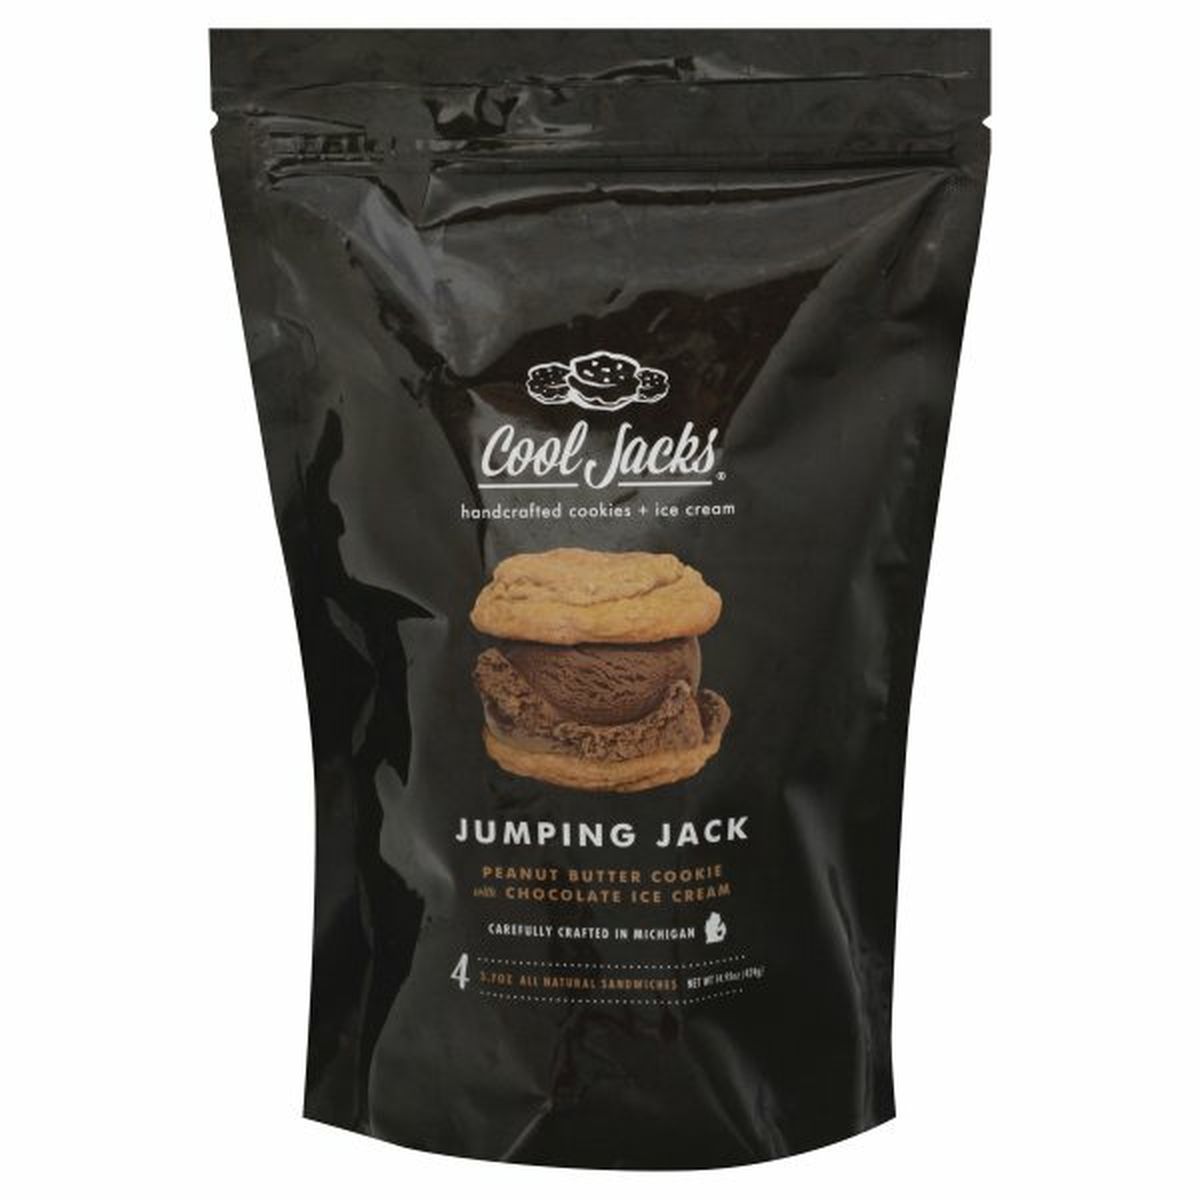 Calories in Cool Jacks Ice Cream Sandwiches, Jumping Jack